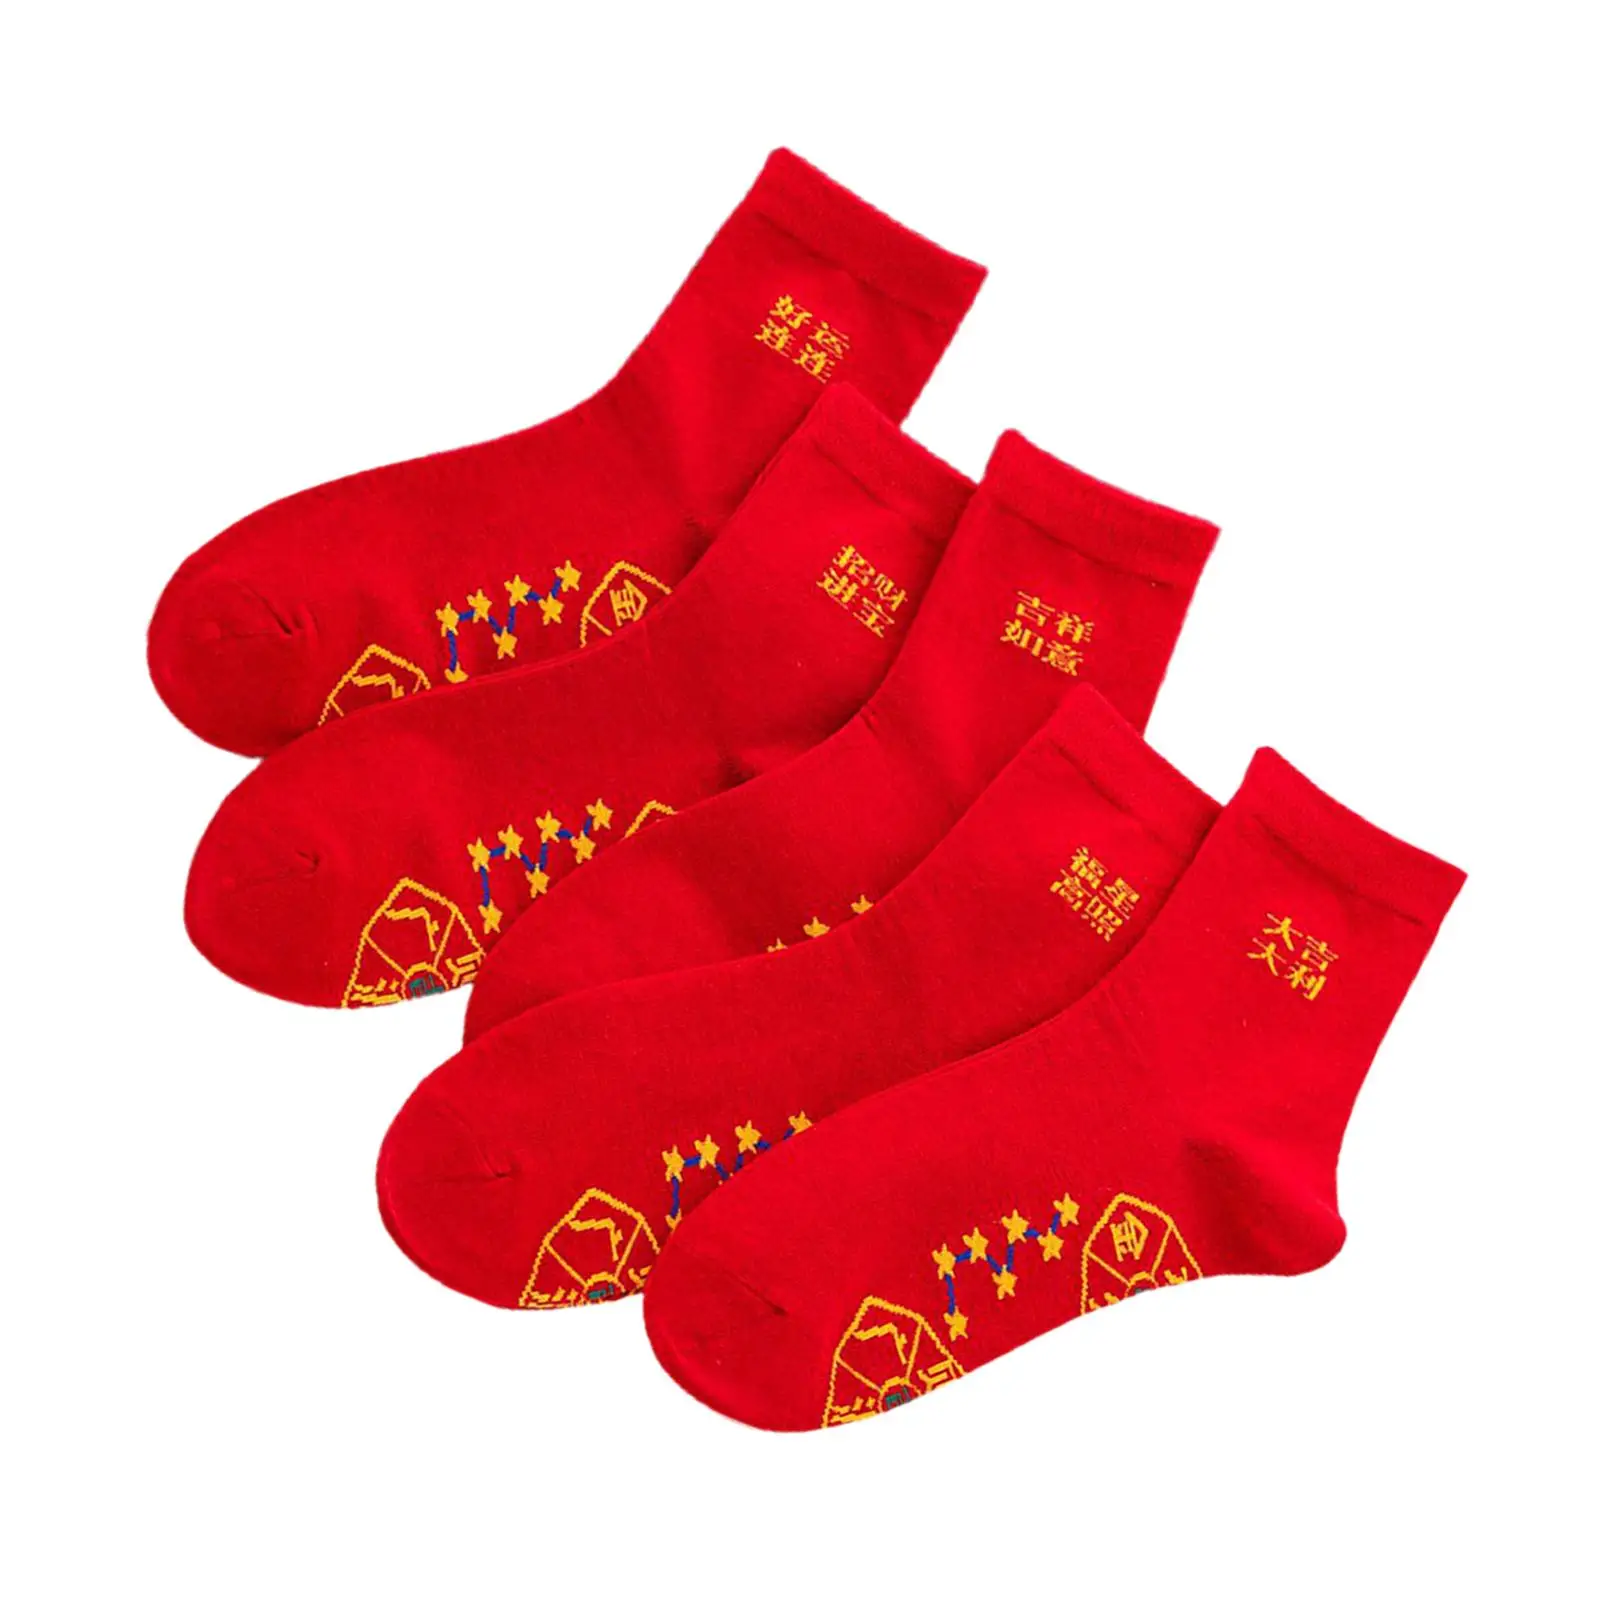 New Year Red Cotton Socks with Chinese Cultural Characteristics Winter Funny Ankle Socks for Adults Teens Spring Festival Socks